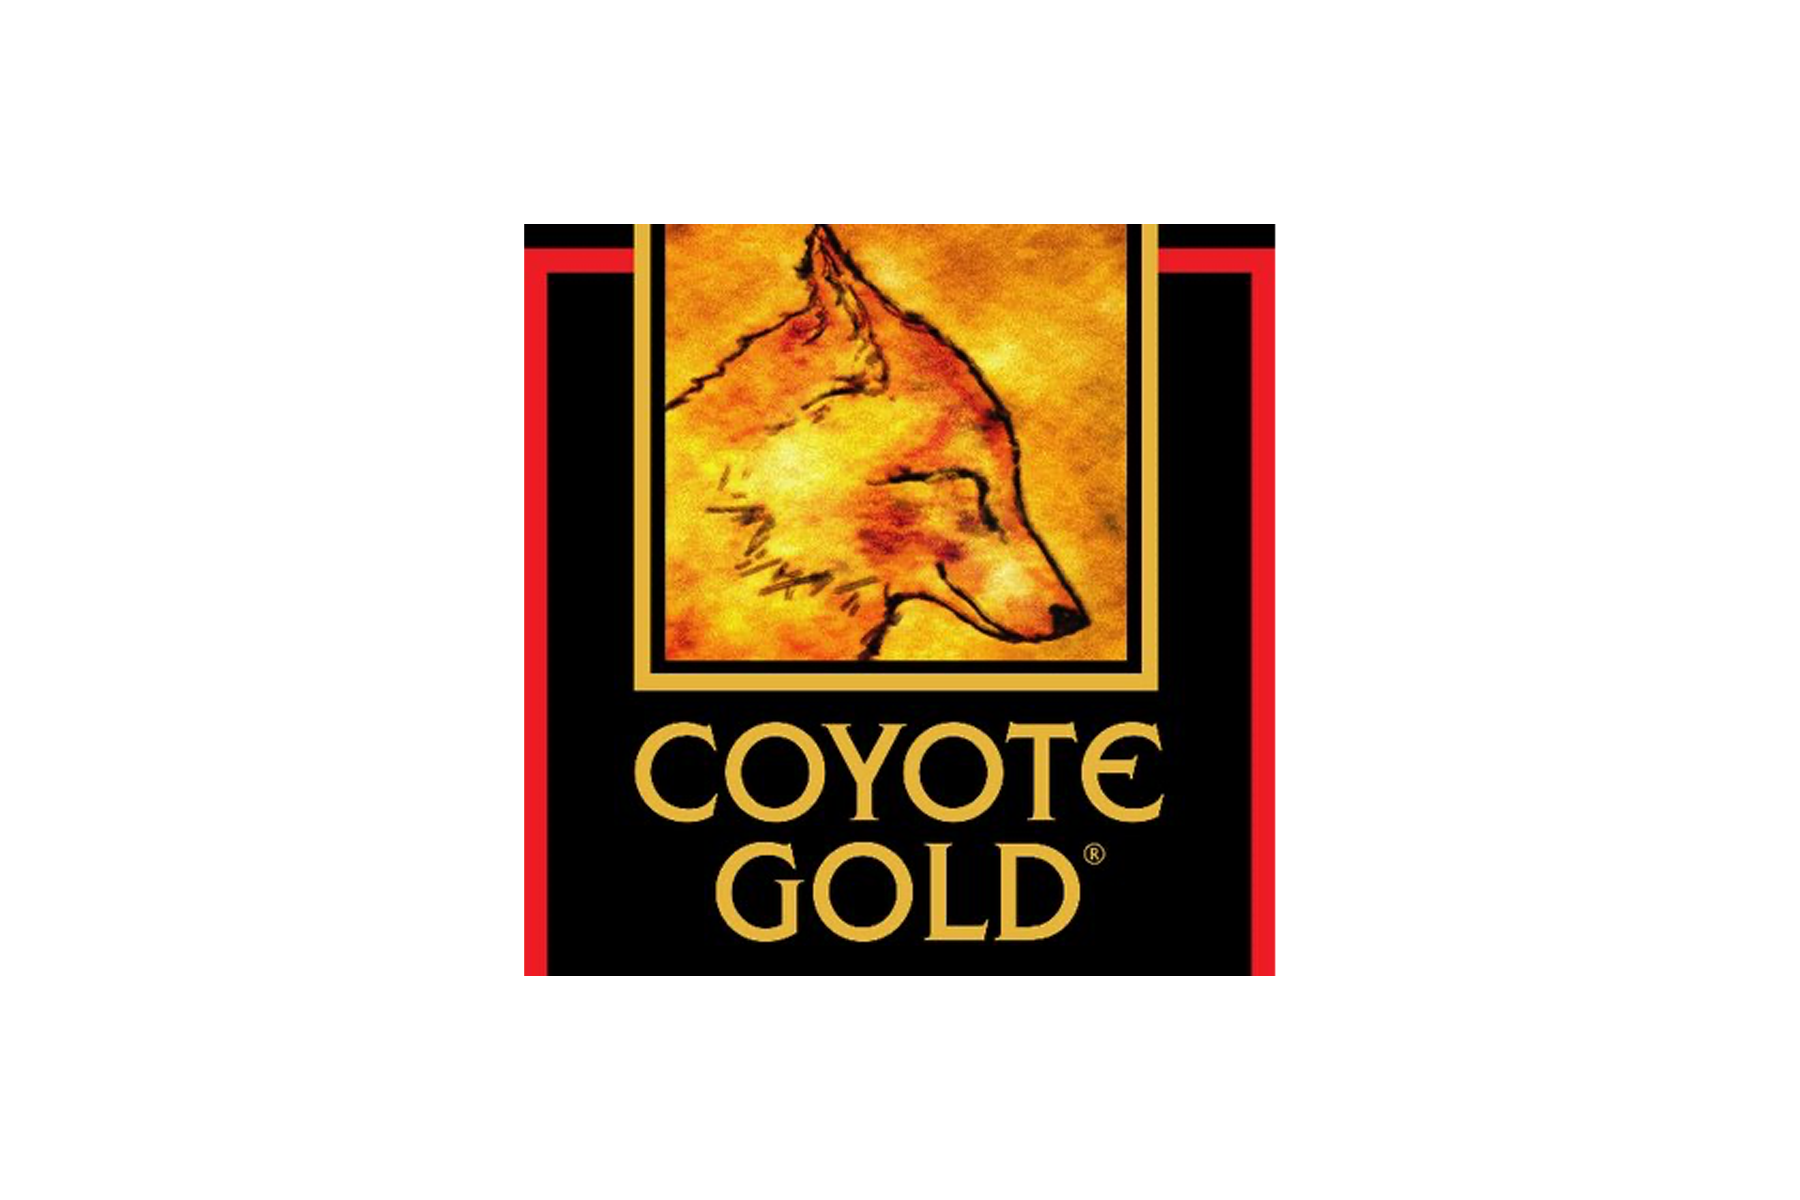 Coyote Gold